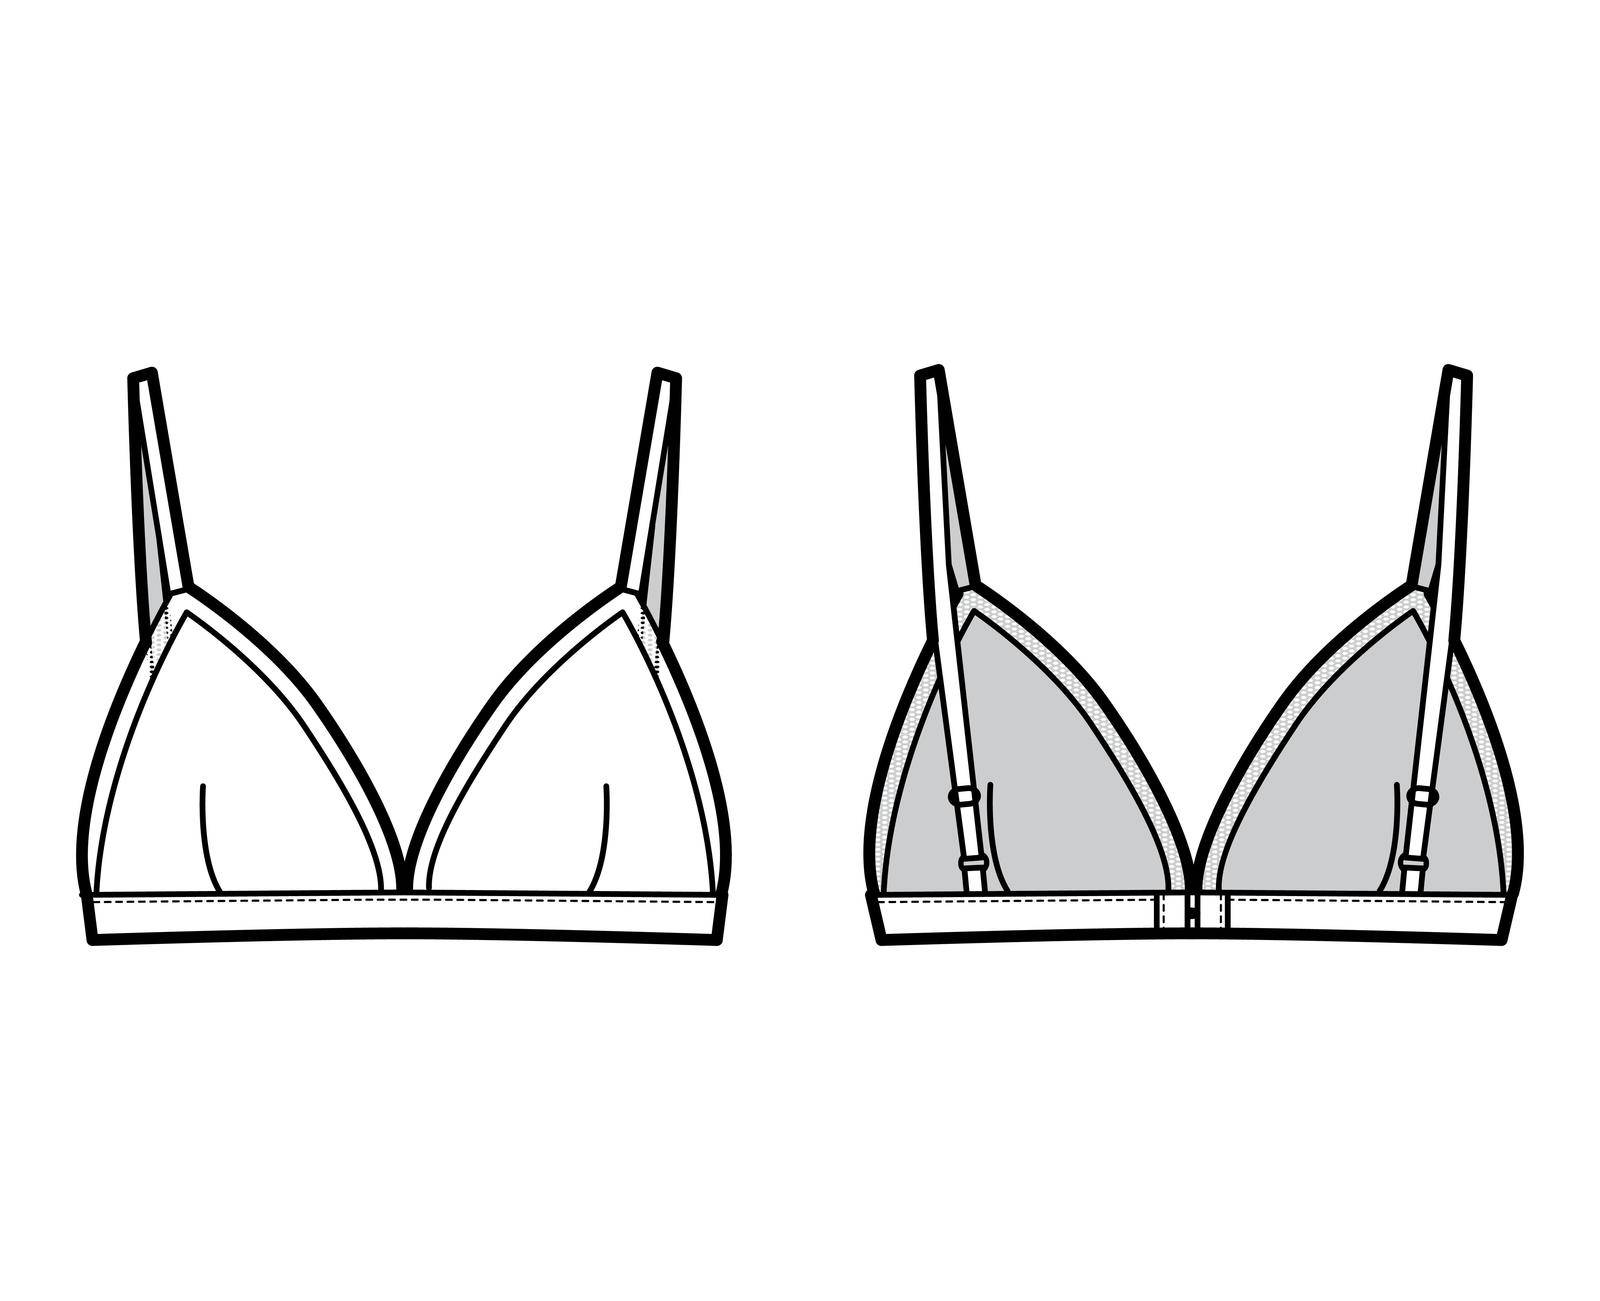 Triangle Bra lingerie technical fashion illustration with adjustable straps, hook-and-eye closure, sheer edge cups. Flat by Vectoressa